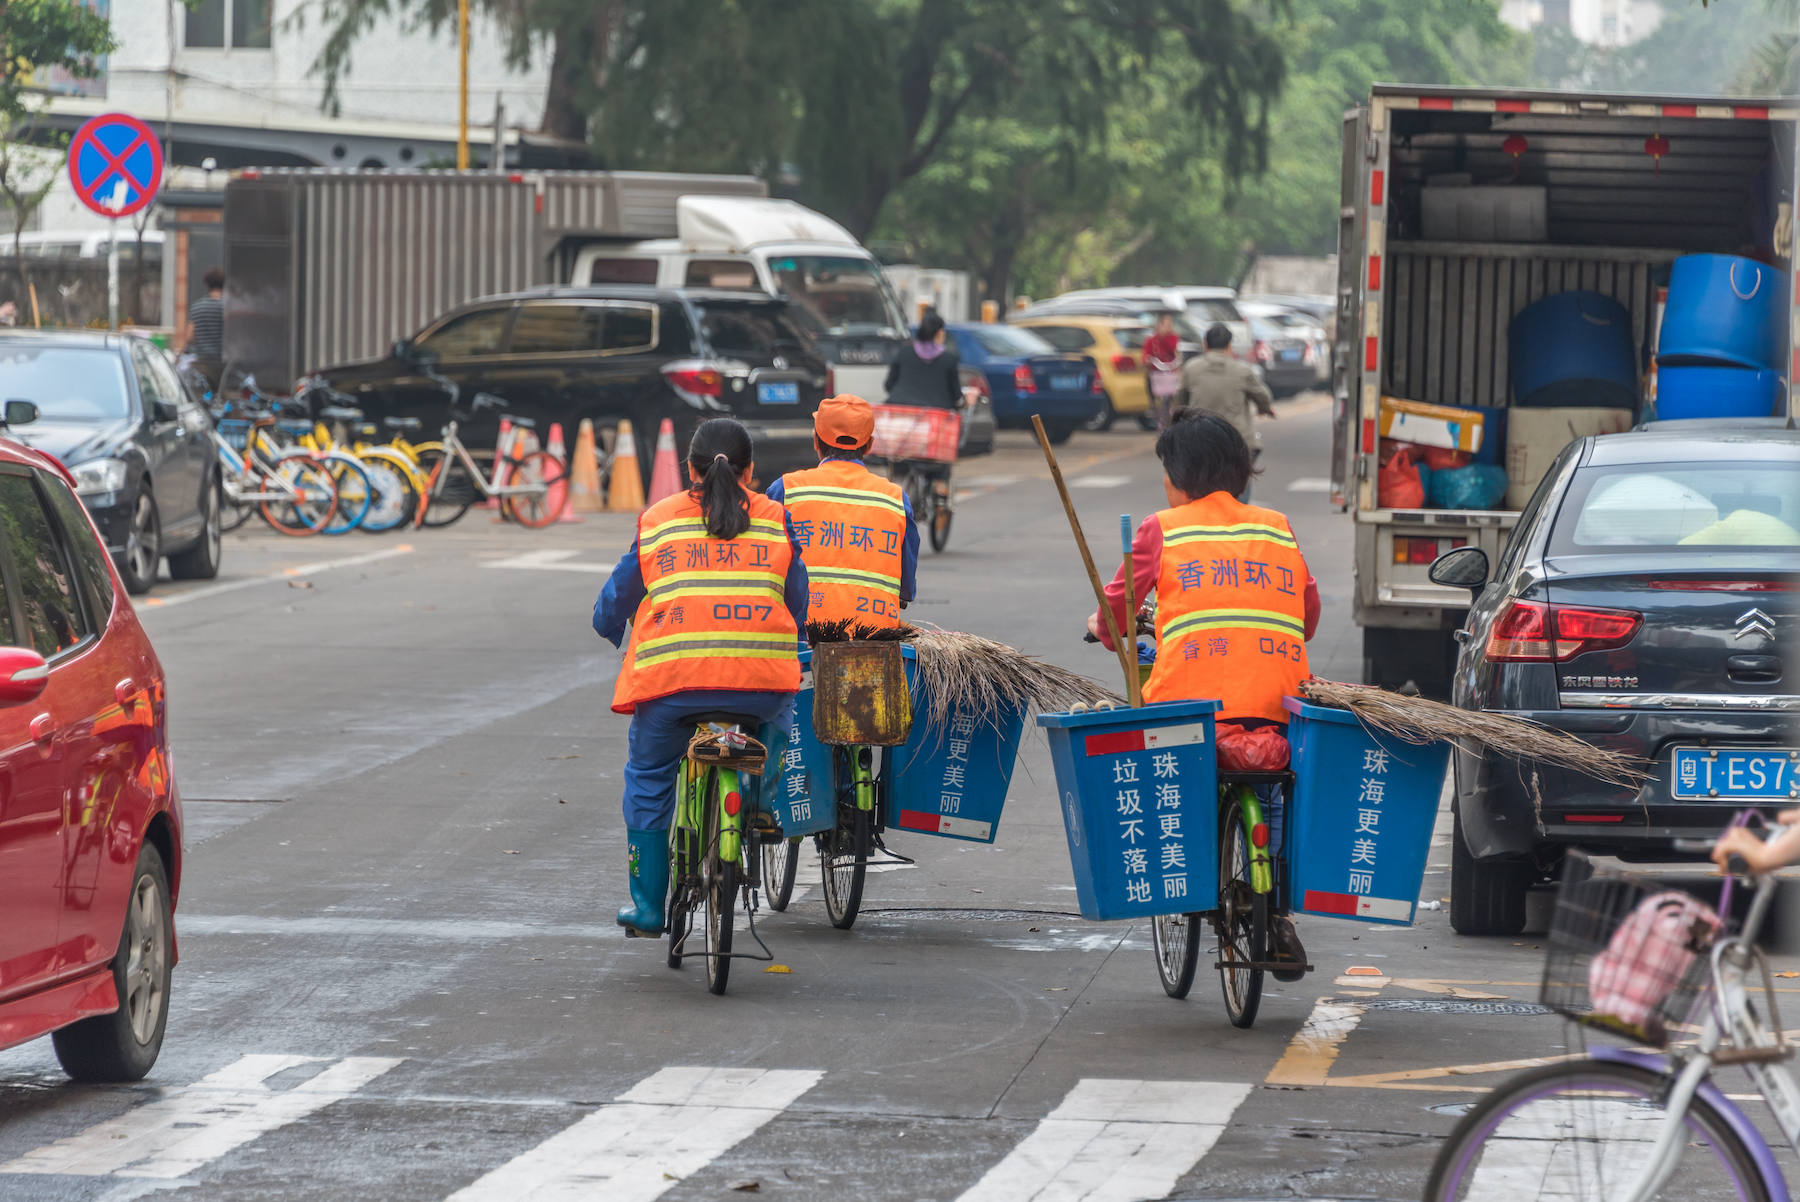 Three sanitation workers on bicycles with blue plastic bins attached to either side ride in the city streets wearing orange vests and carrying brooms